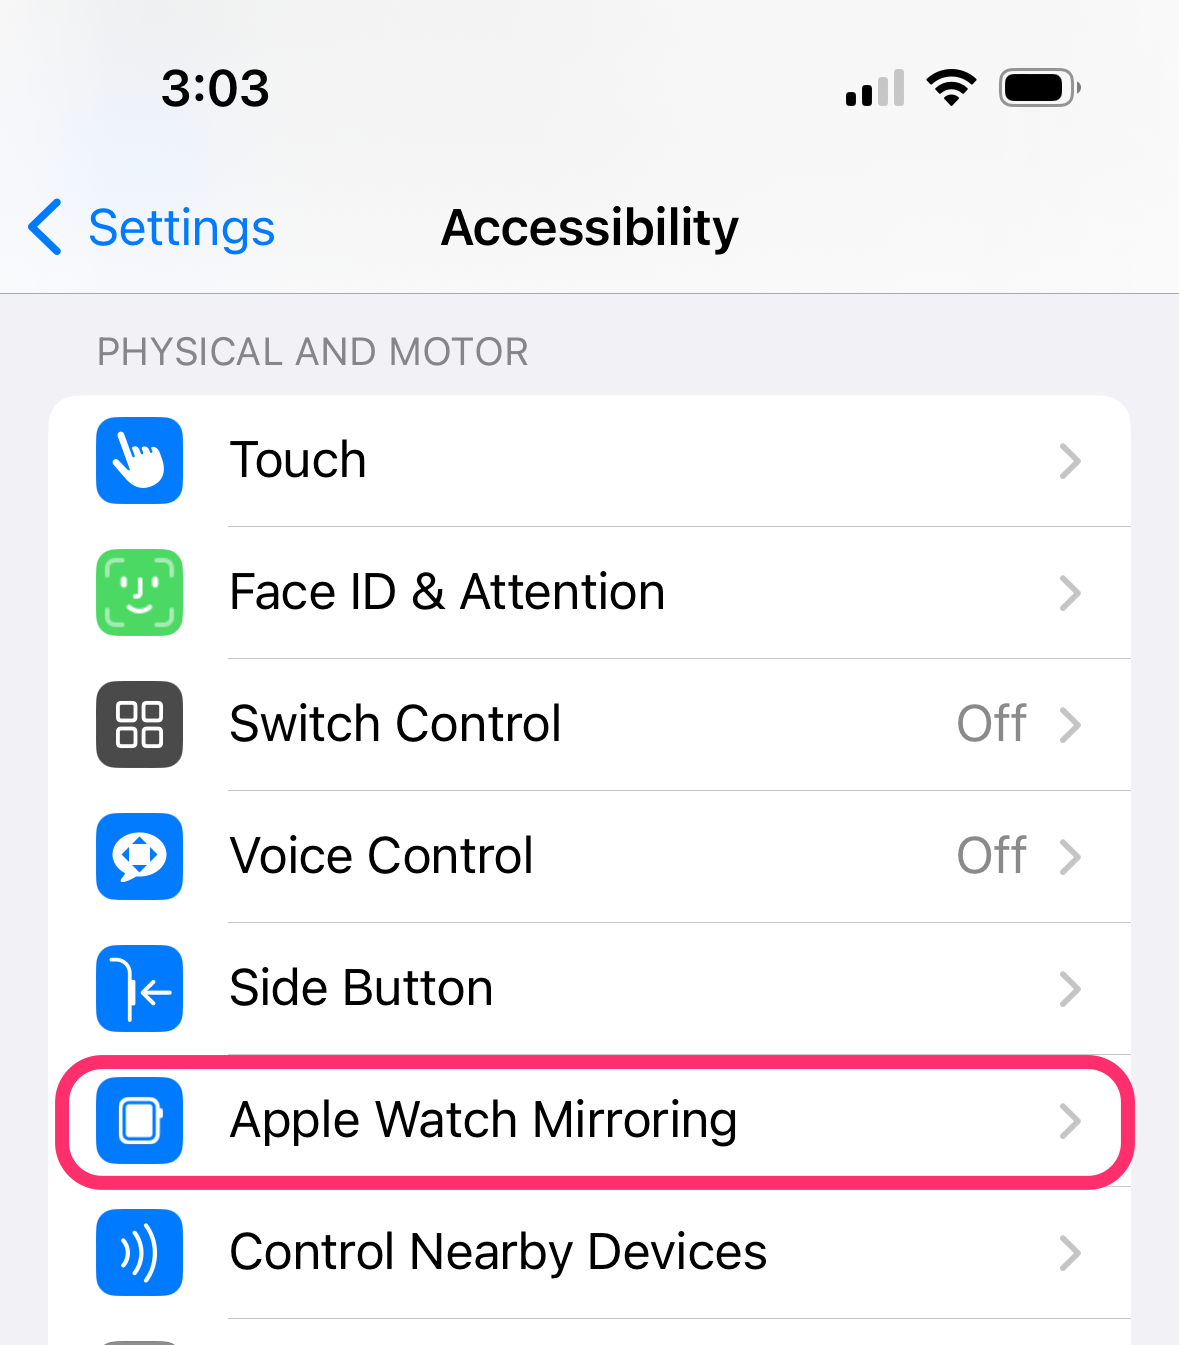 Apple Watch mirroring in accessibility